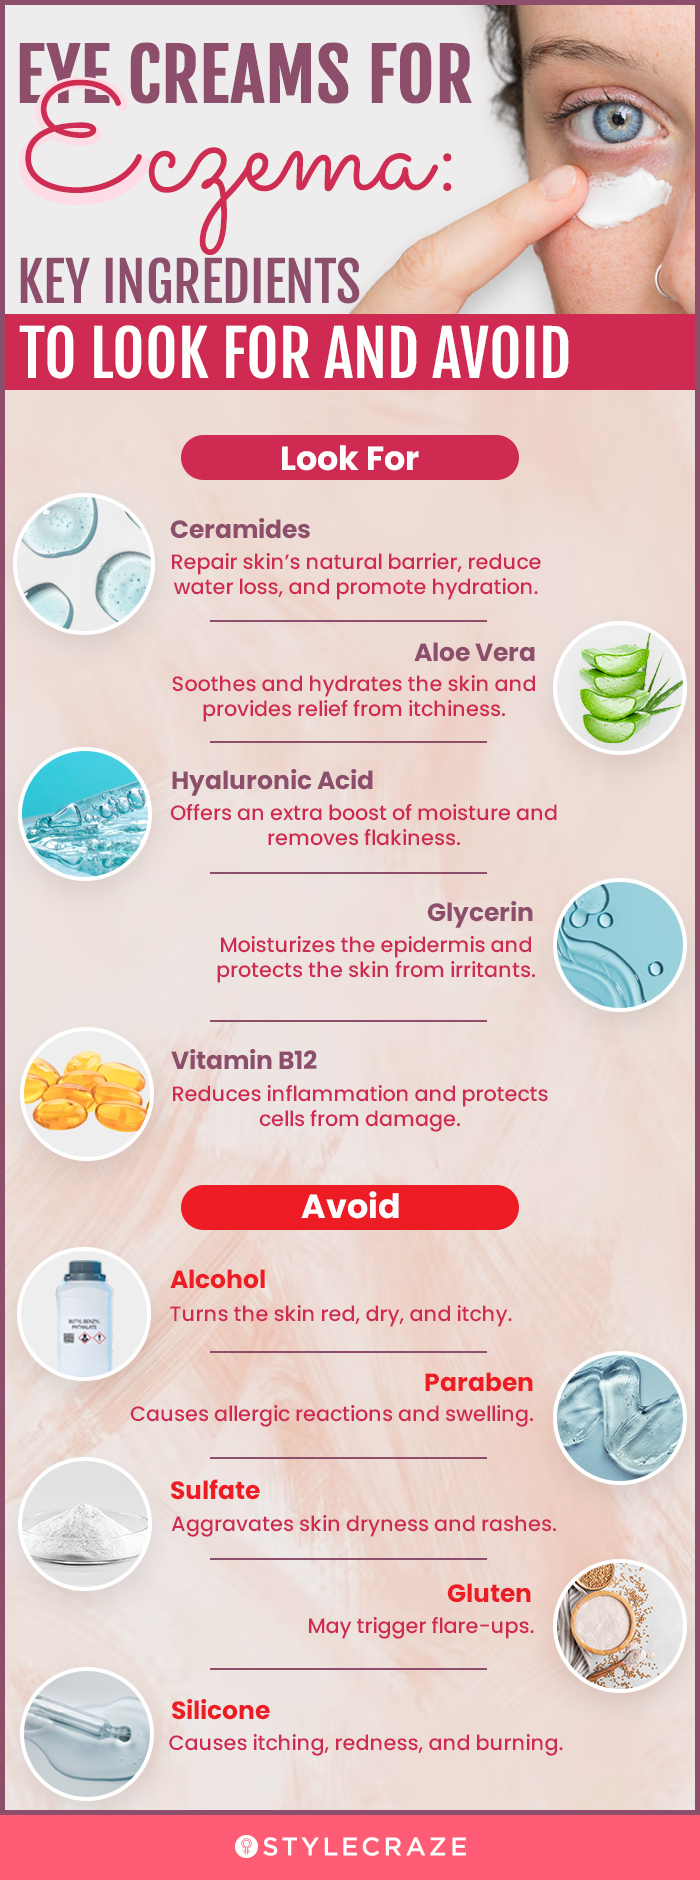 Eye Creams For Eczema: Key Ingredients To Look For (infographic)